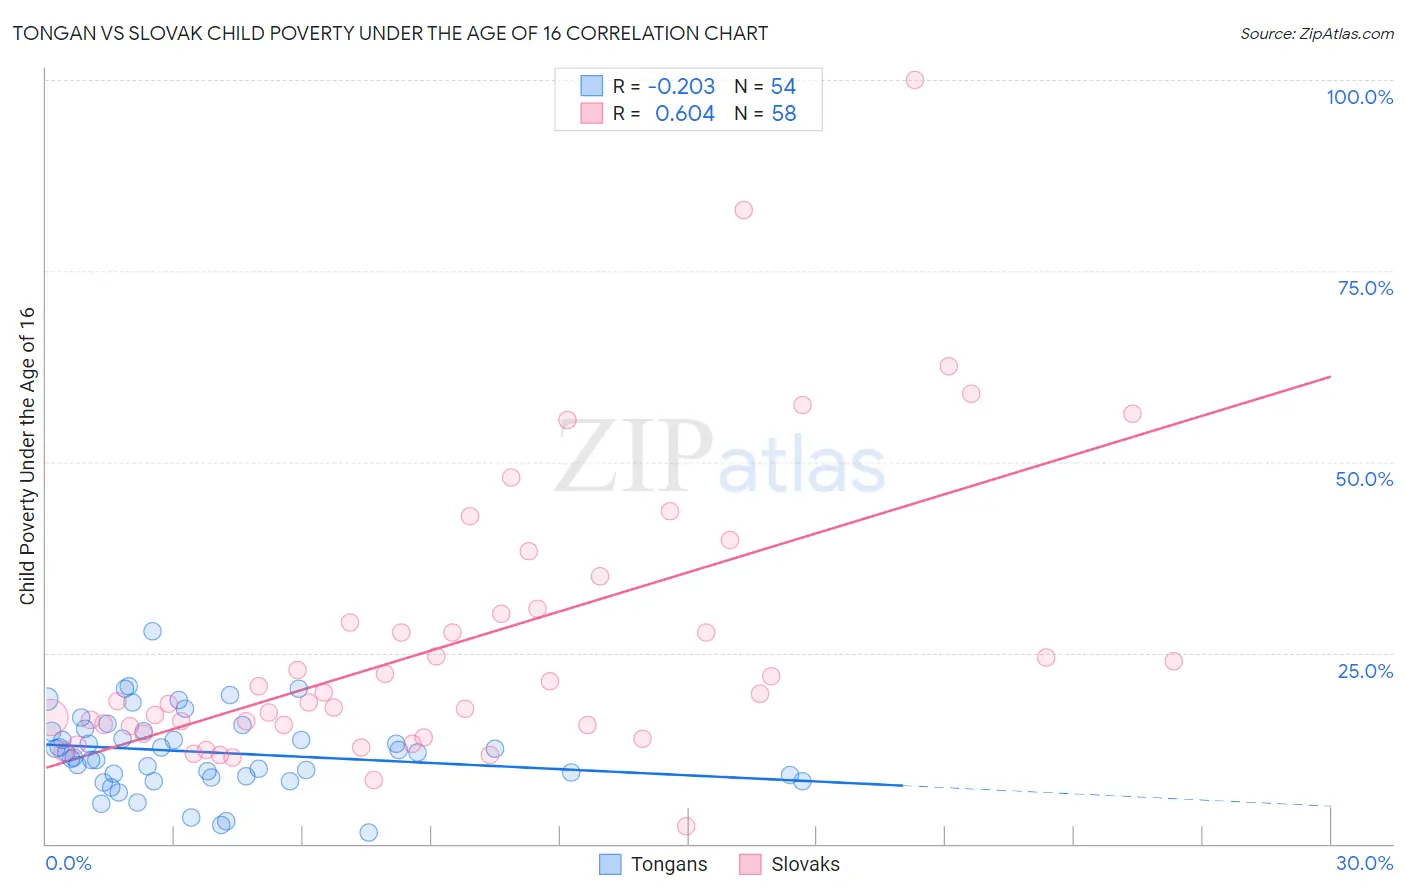 Tongan vs Slovak Child Poverty Under the Age of 16